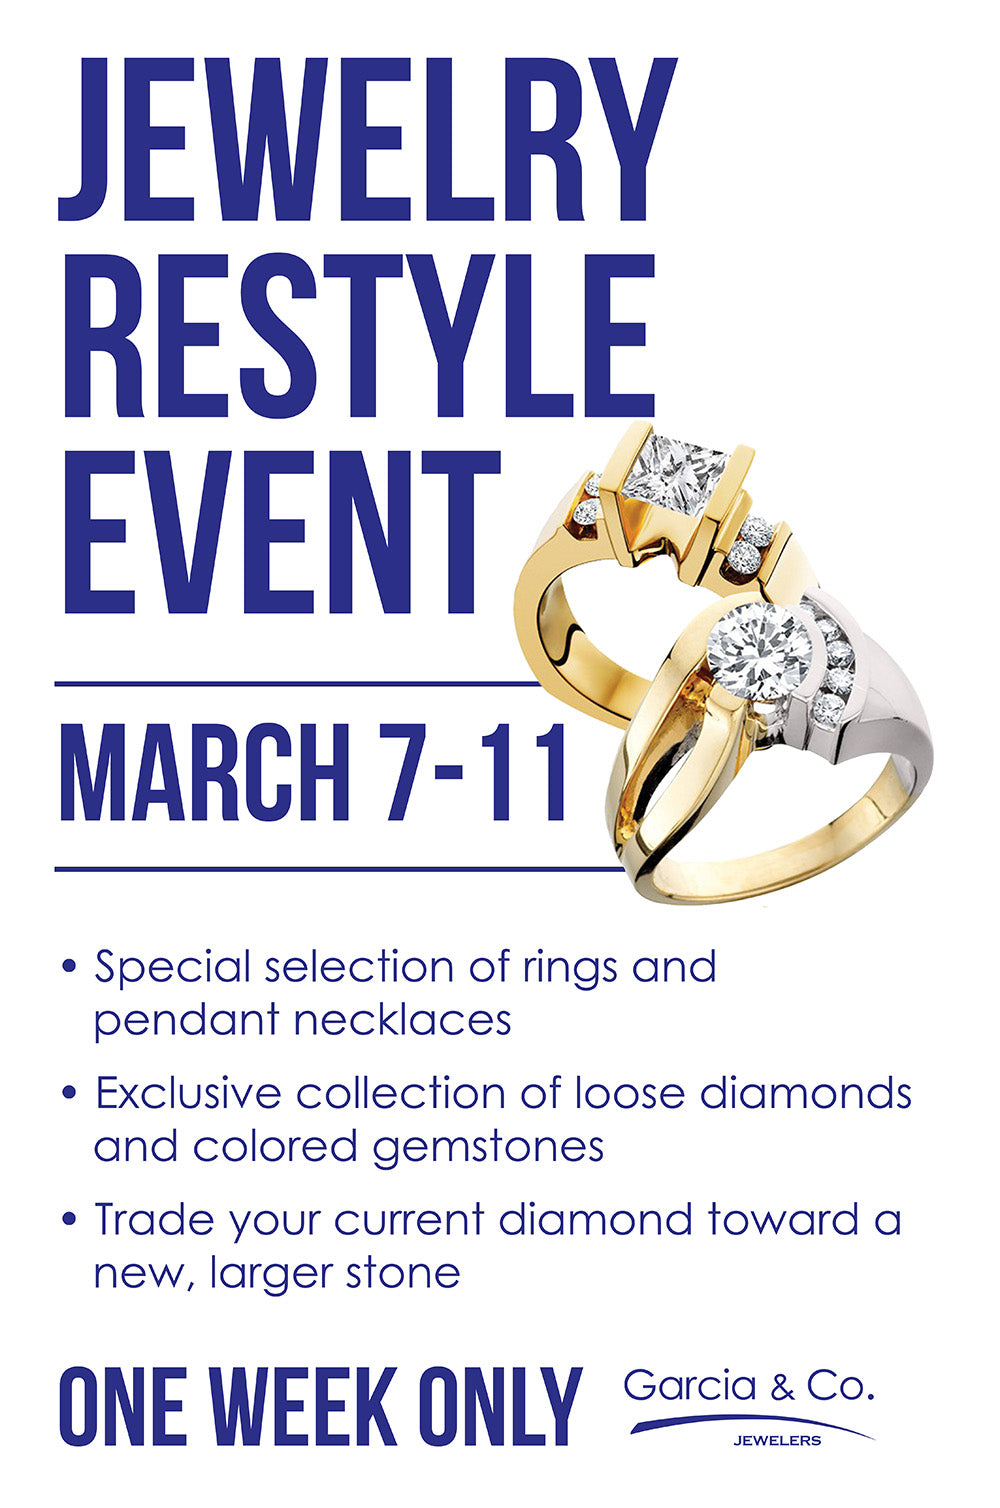 image rings and details about jewelry restyle event